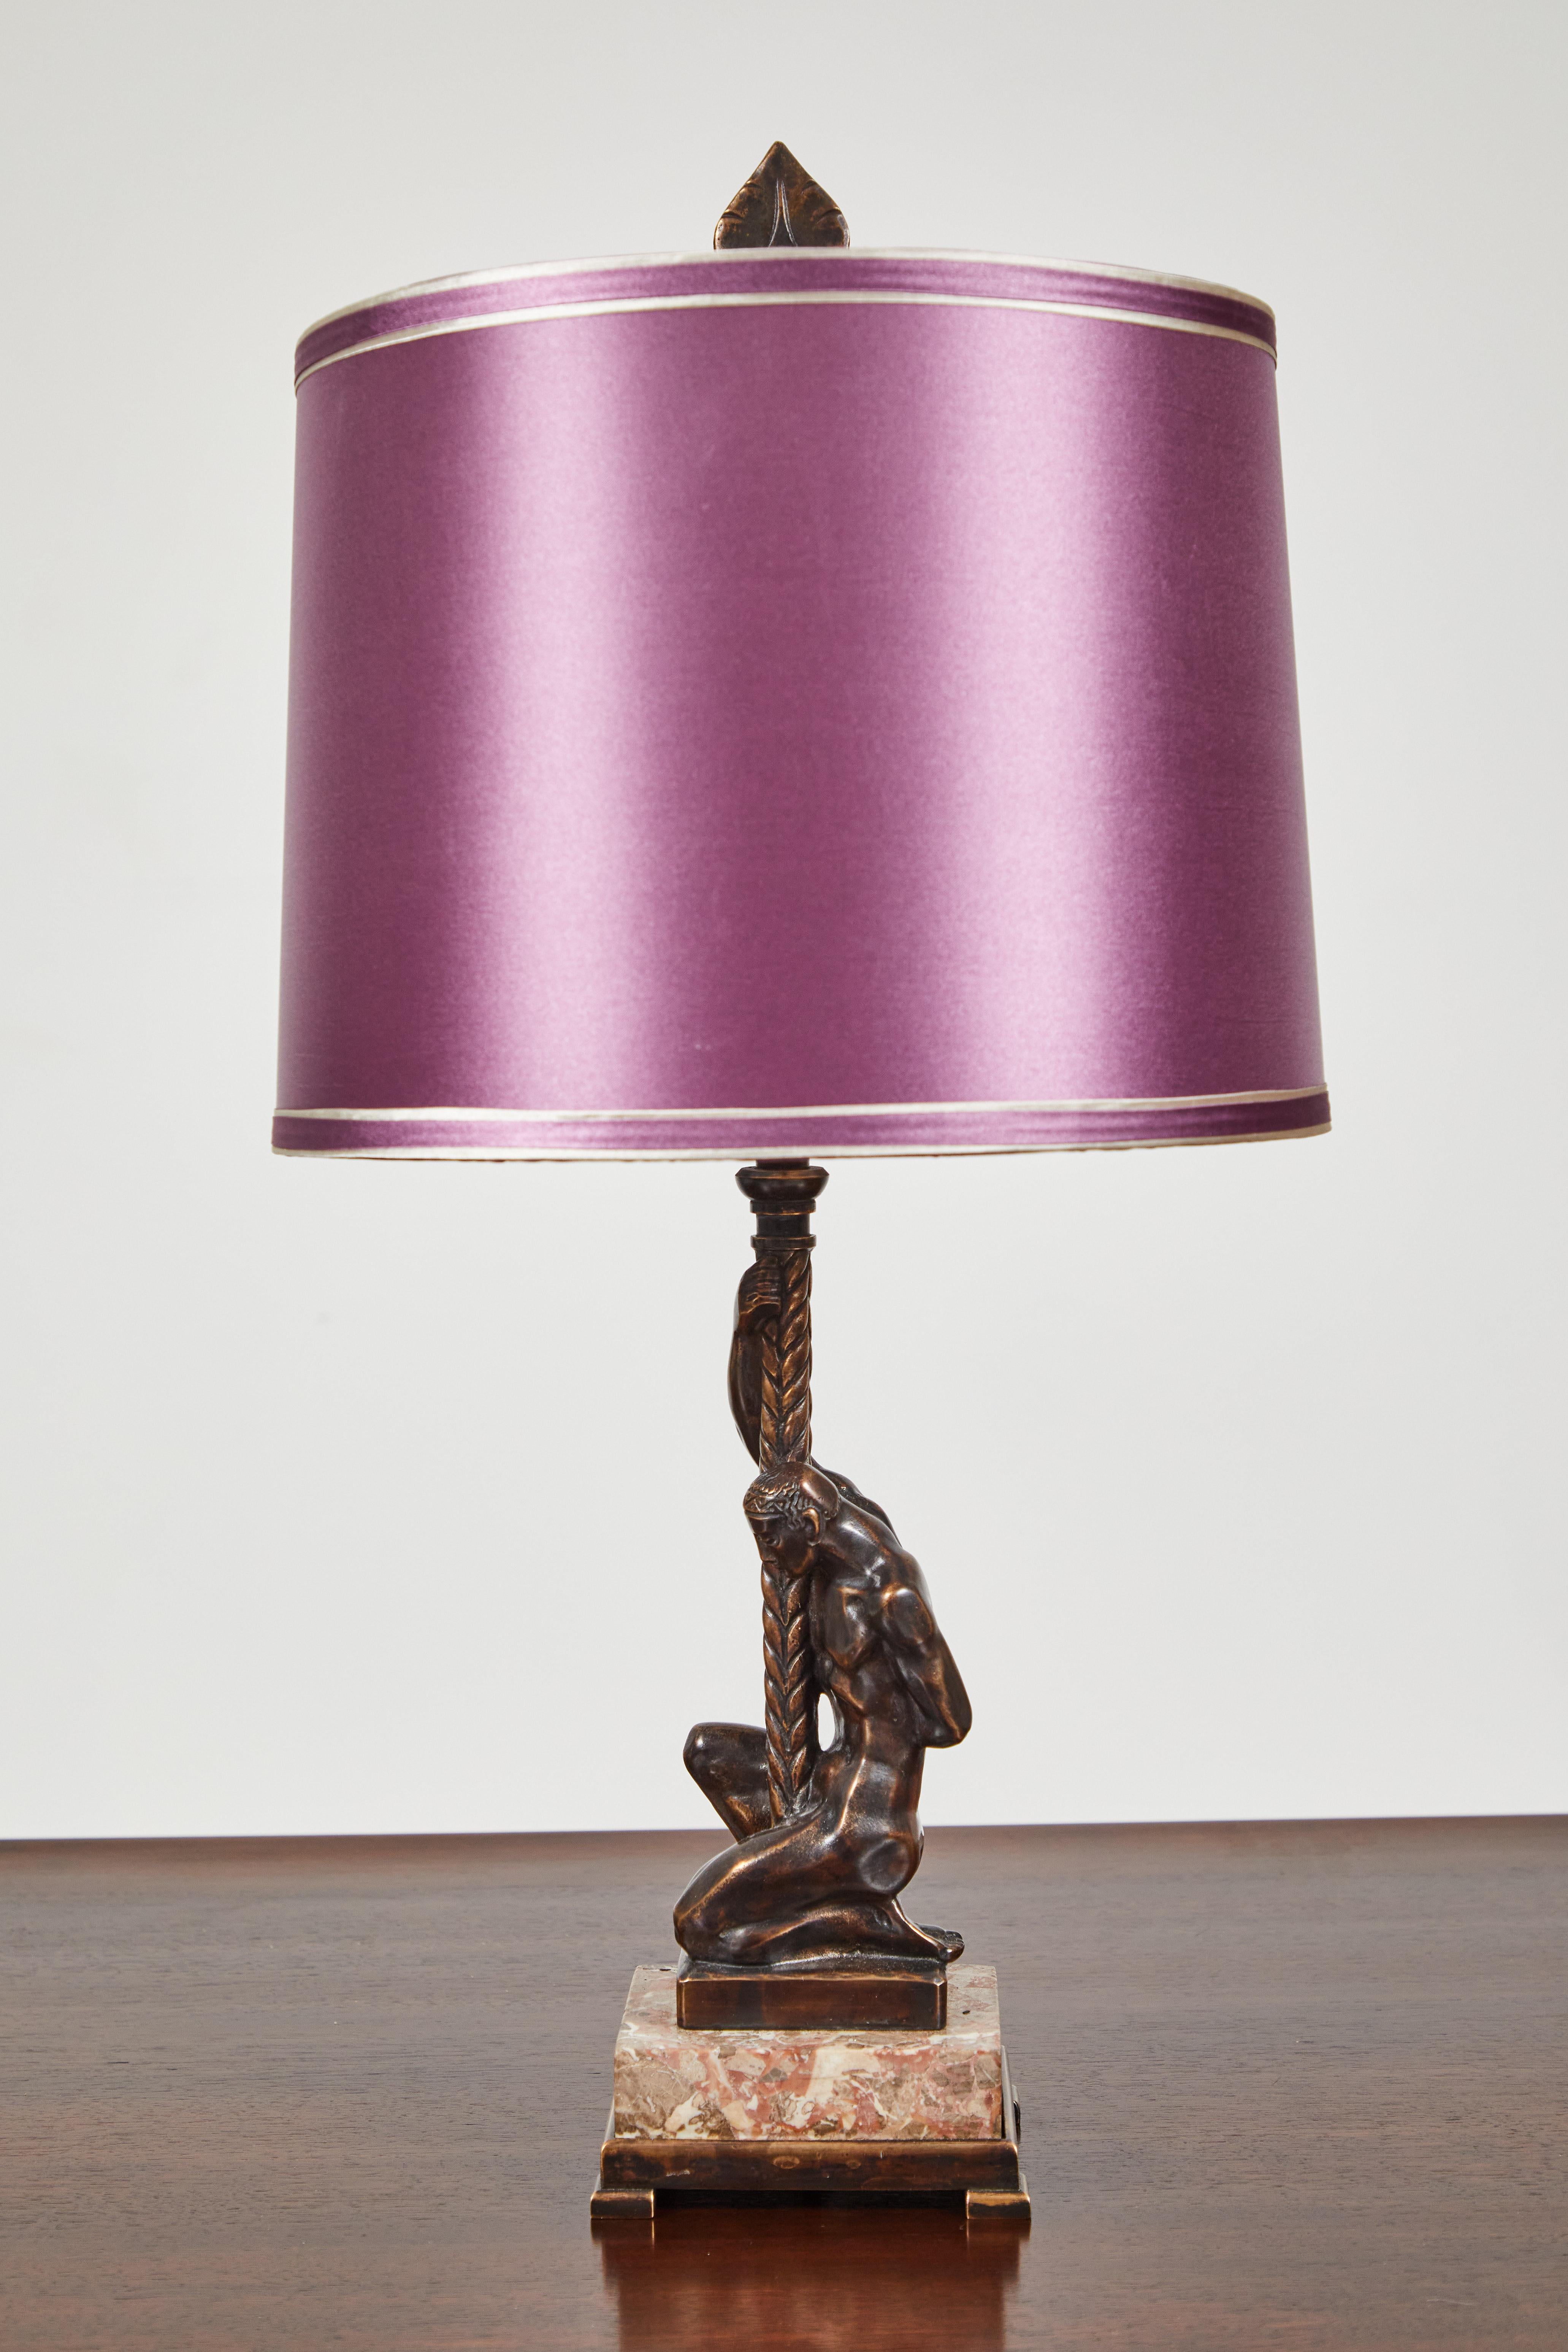 This stunning lamp by Oscar Bach features a brass 